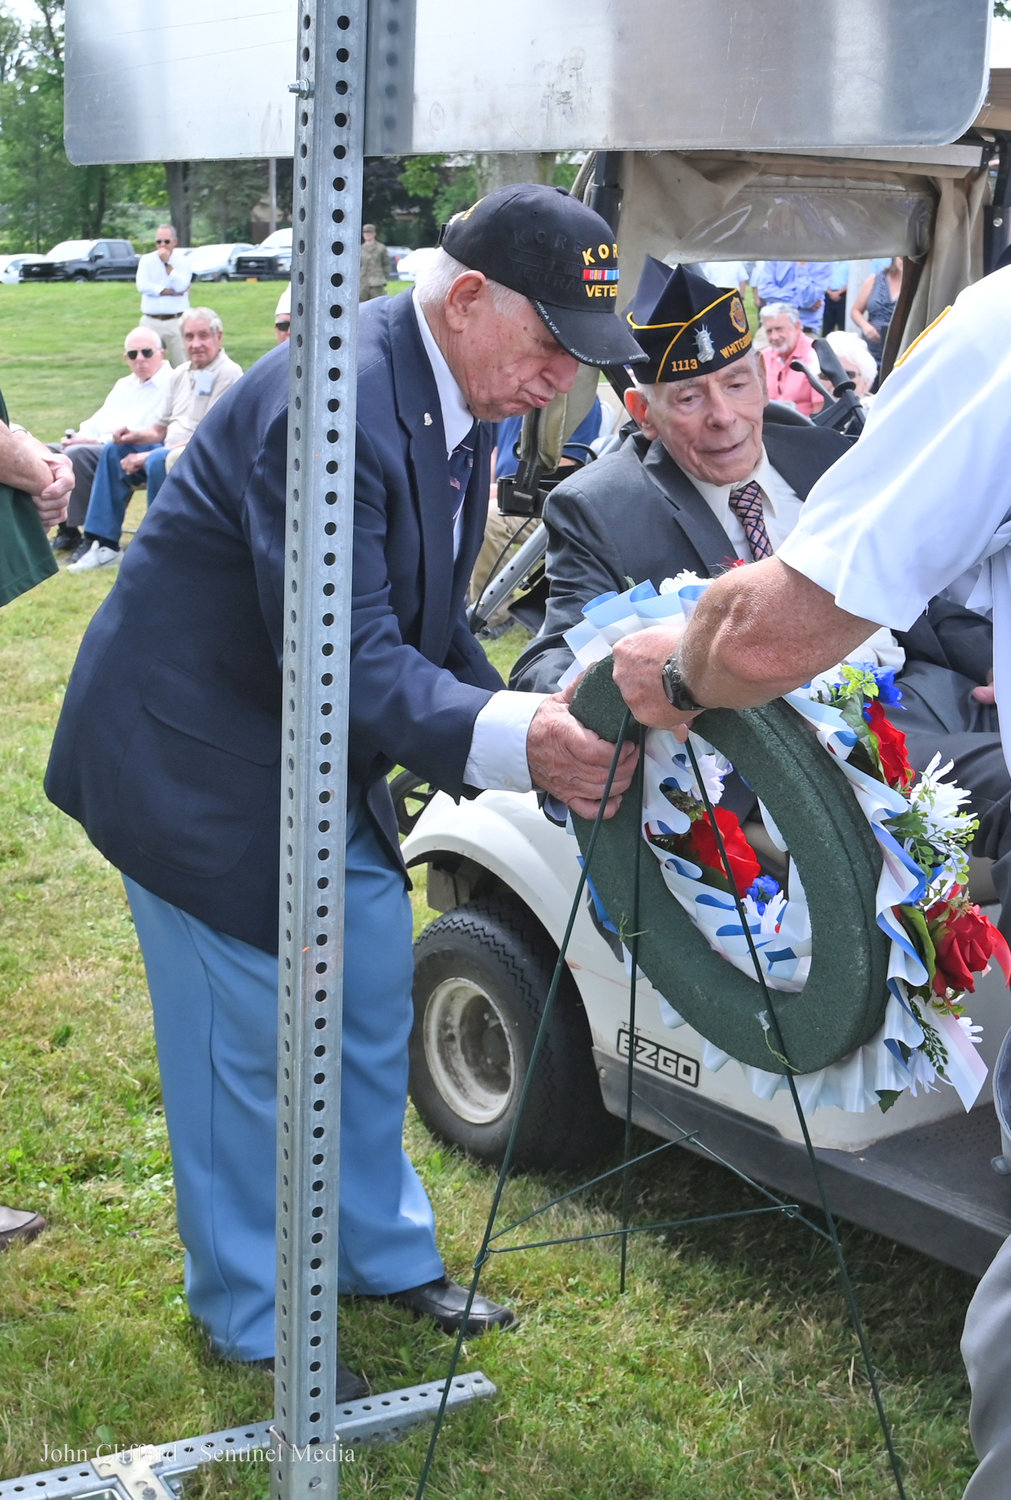 Ceremonial wreath laying at the foot of the Route 365 Korean War dedication marker was part of the Wednesday, July 27 dedication ceremony.